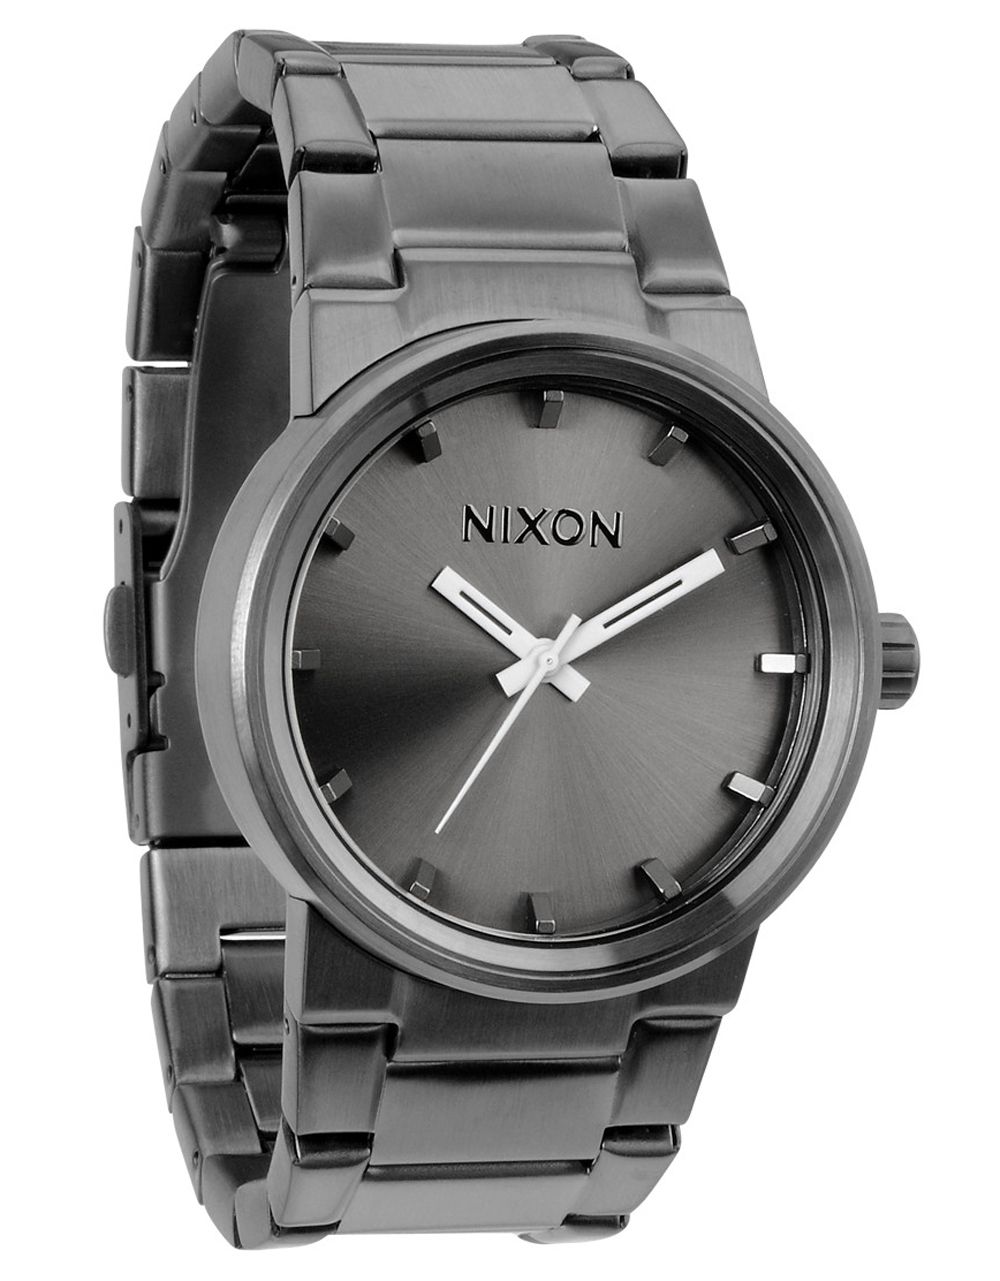 Nixon Cannon Watch in stock at SPoT Skate Shop